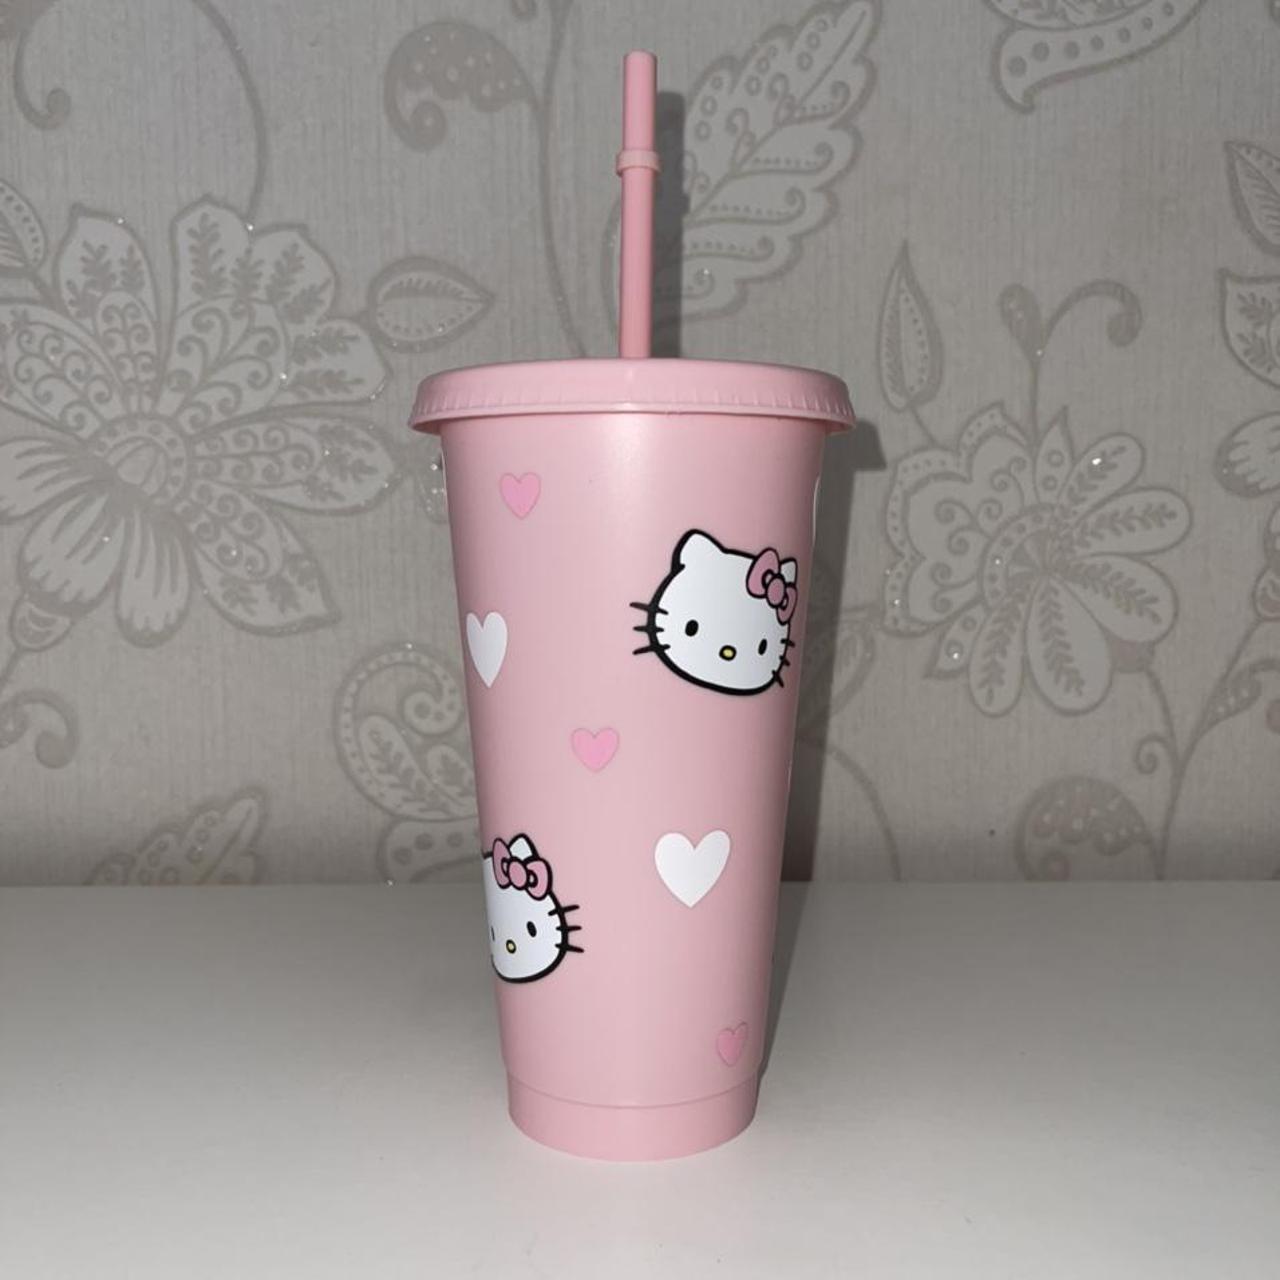 1 Hello Kitty inspired Venti Reusable Iced Cold Coffee Cup